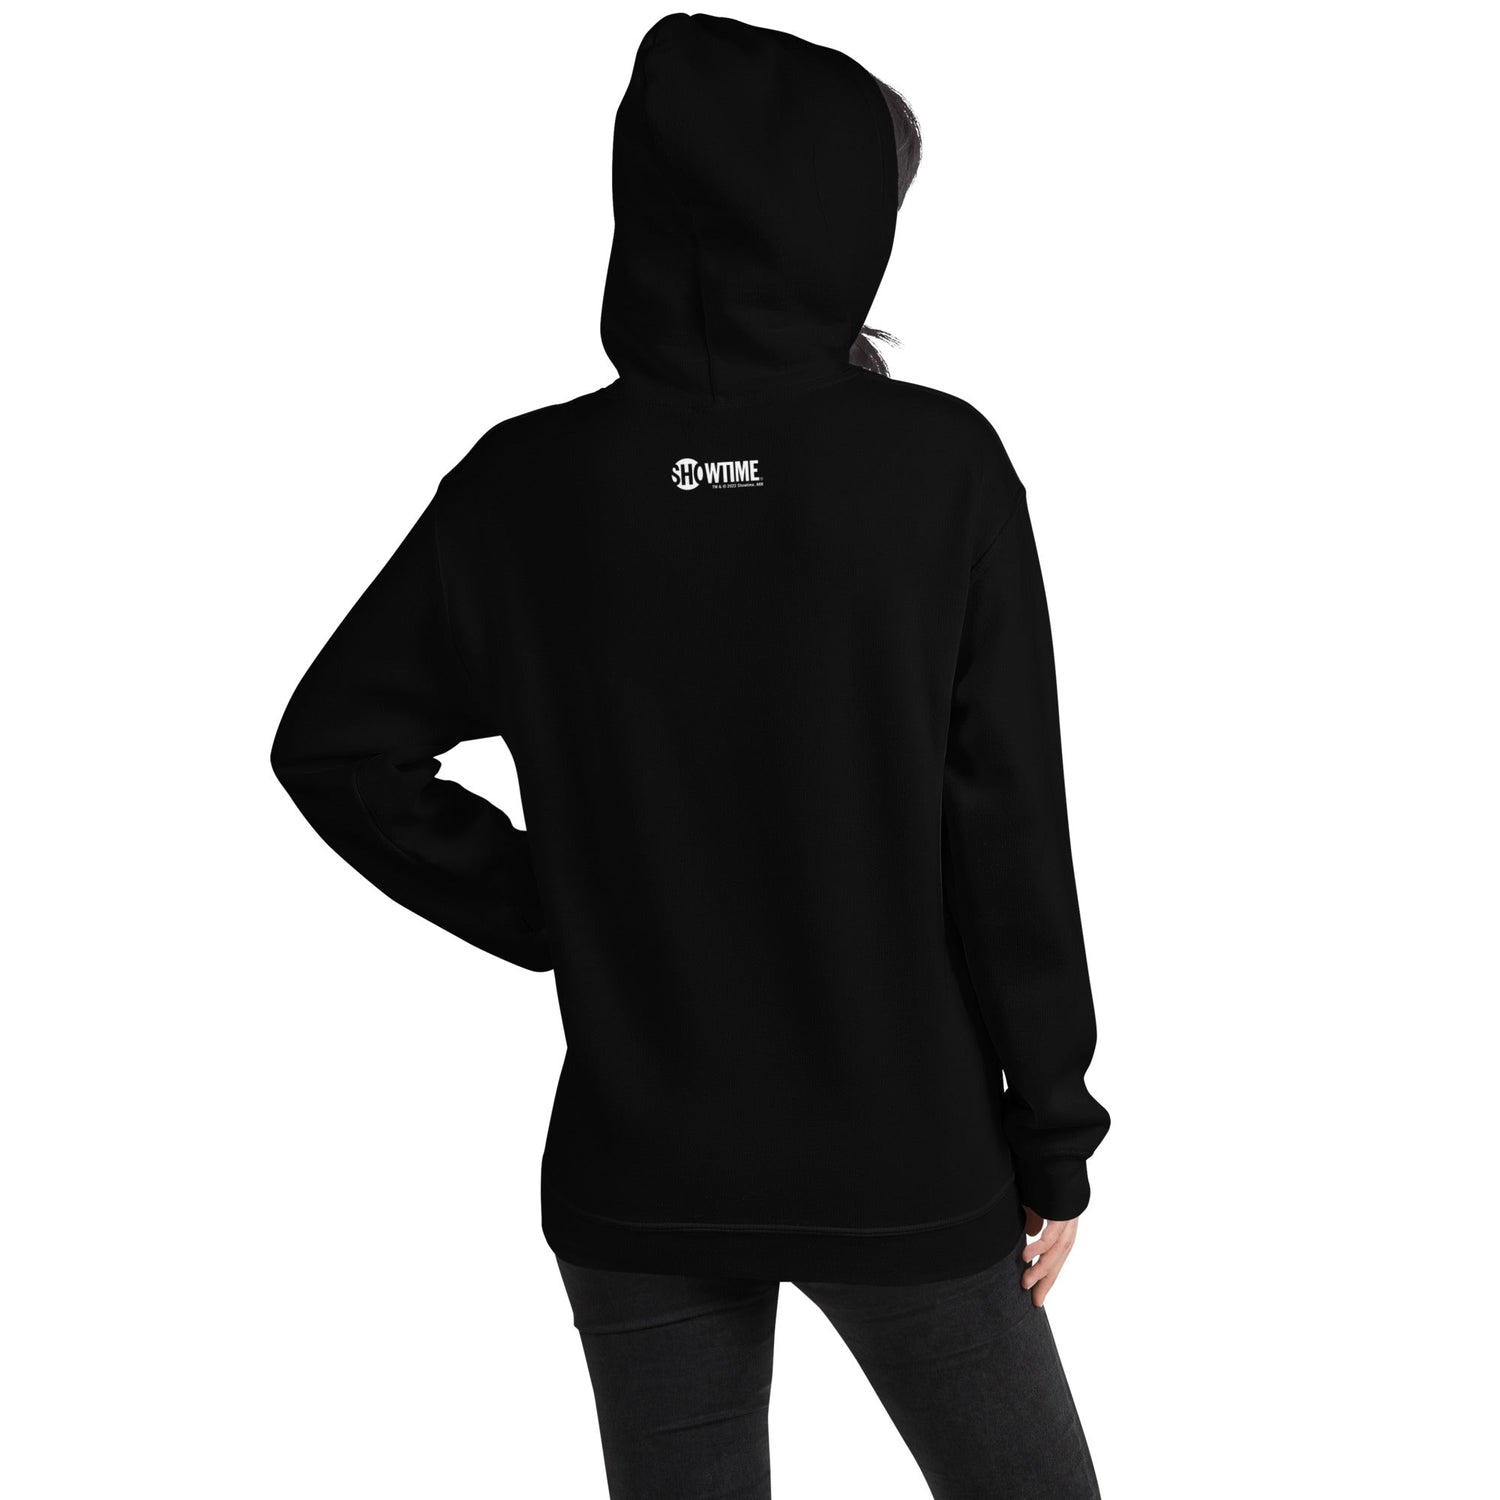 I Love That For You Names Unisex Hoodie - Paramount Shop